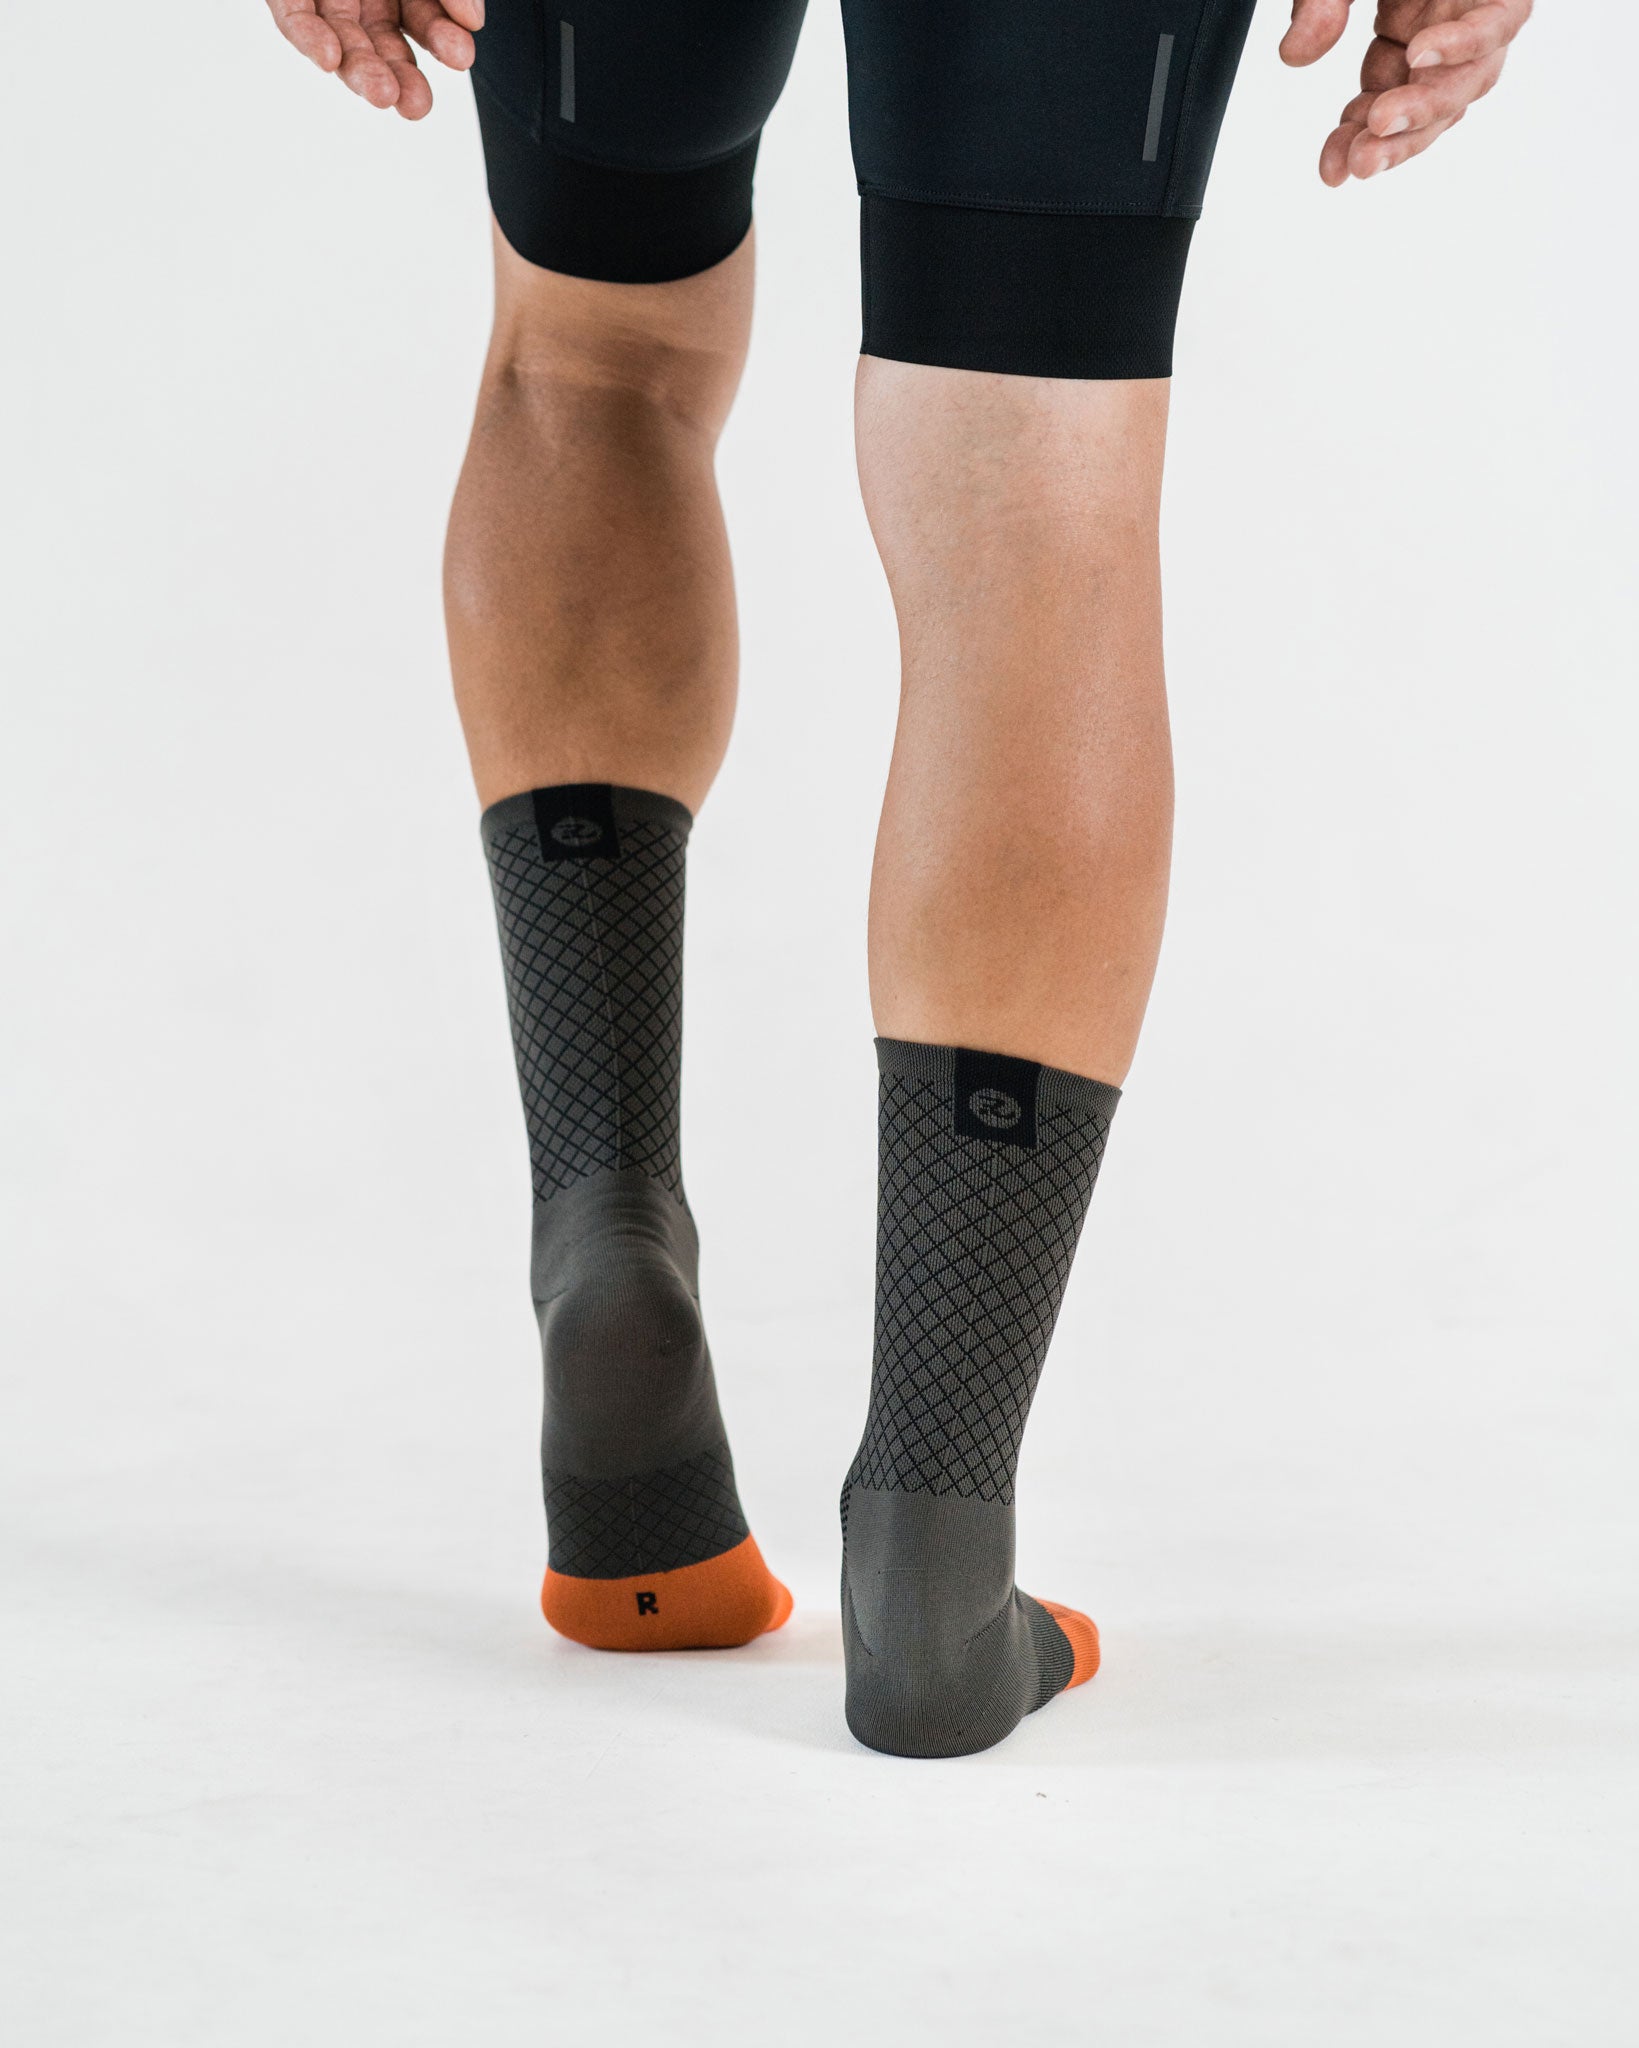 back view of grey socks with black and orange details